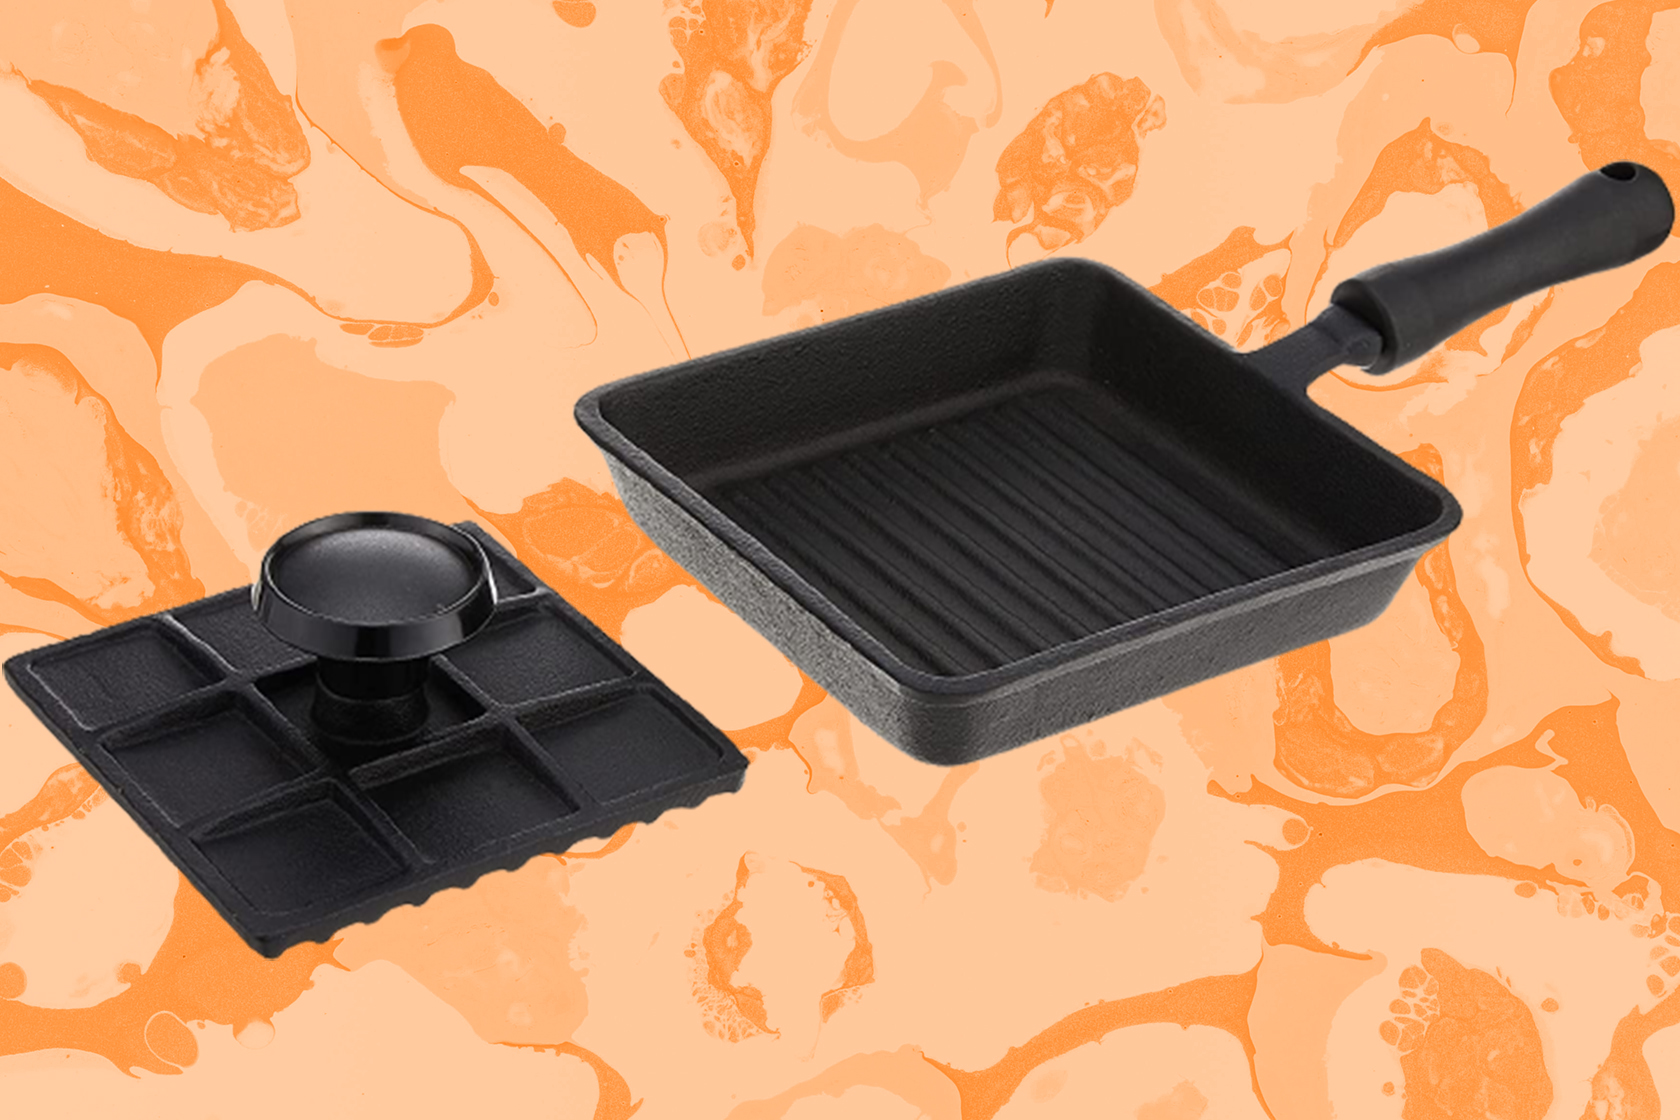 Perfect your panini with the Norpro mini cast iron pan and press